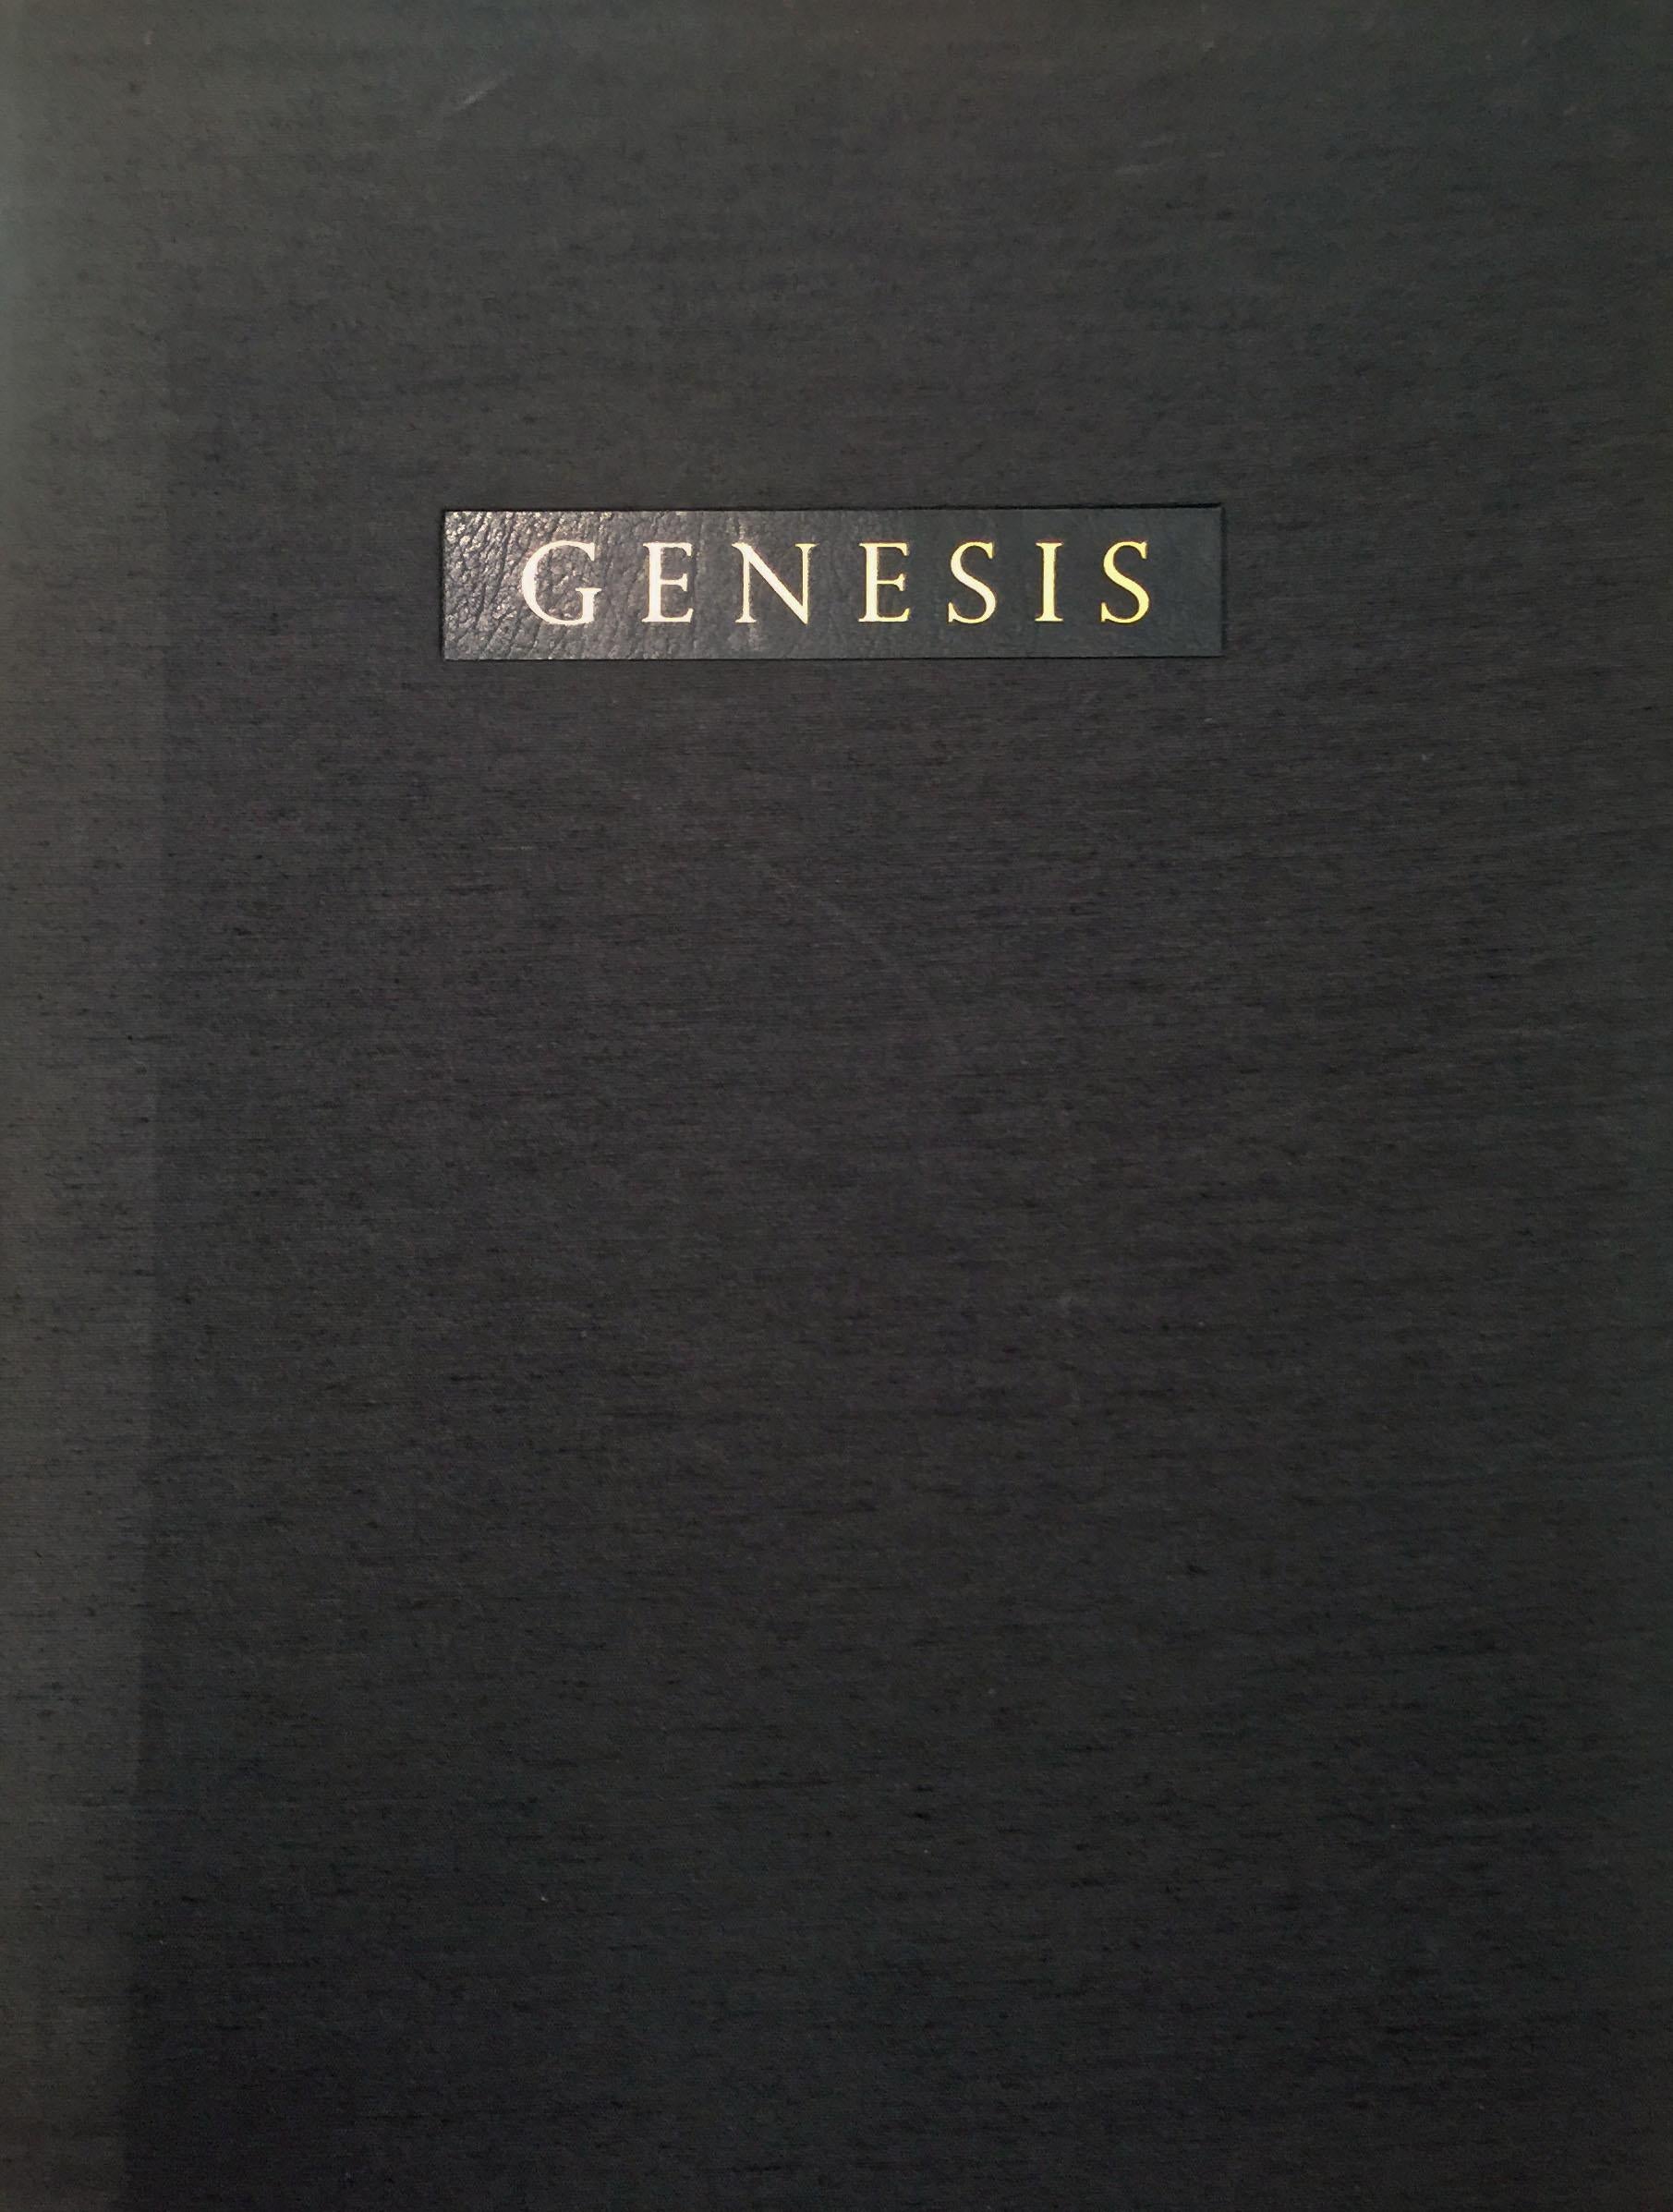 THE FIRST BOOK OF MOSES, CALLED GENESIS.  5